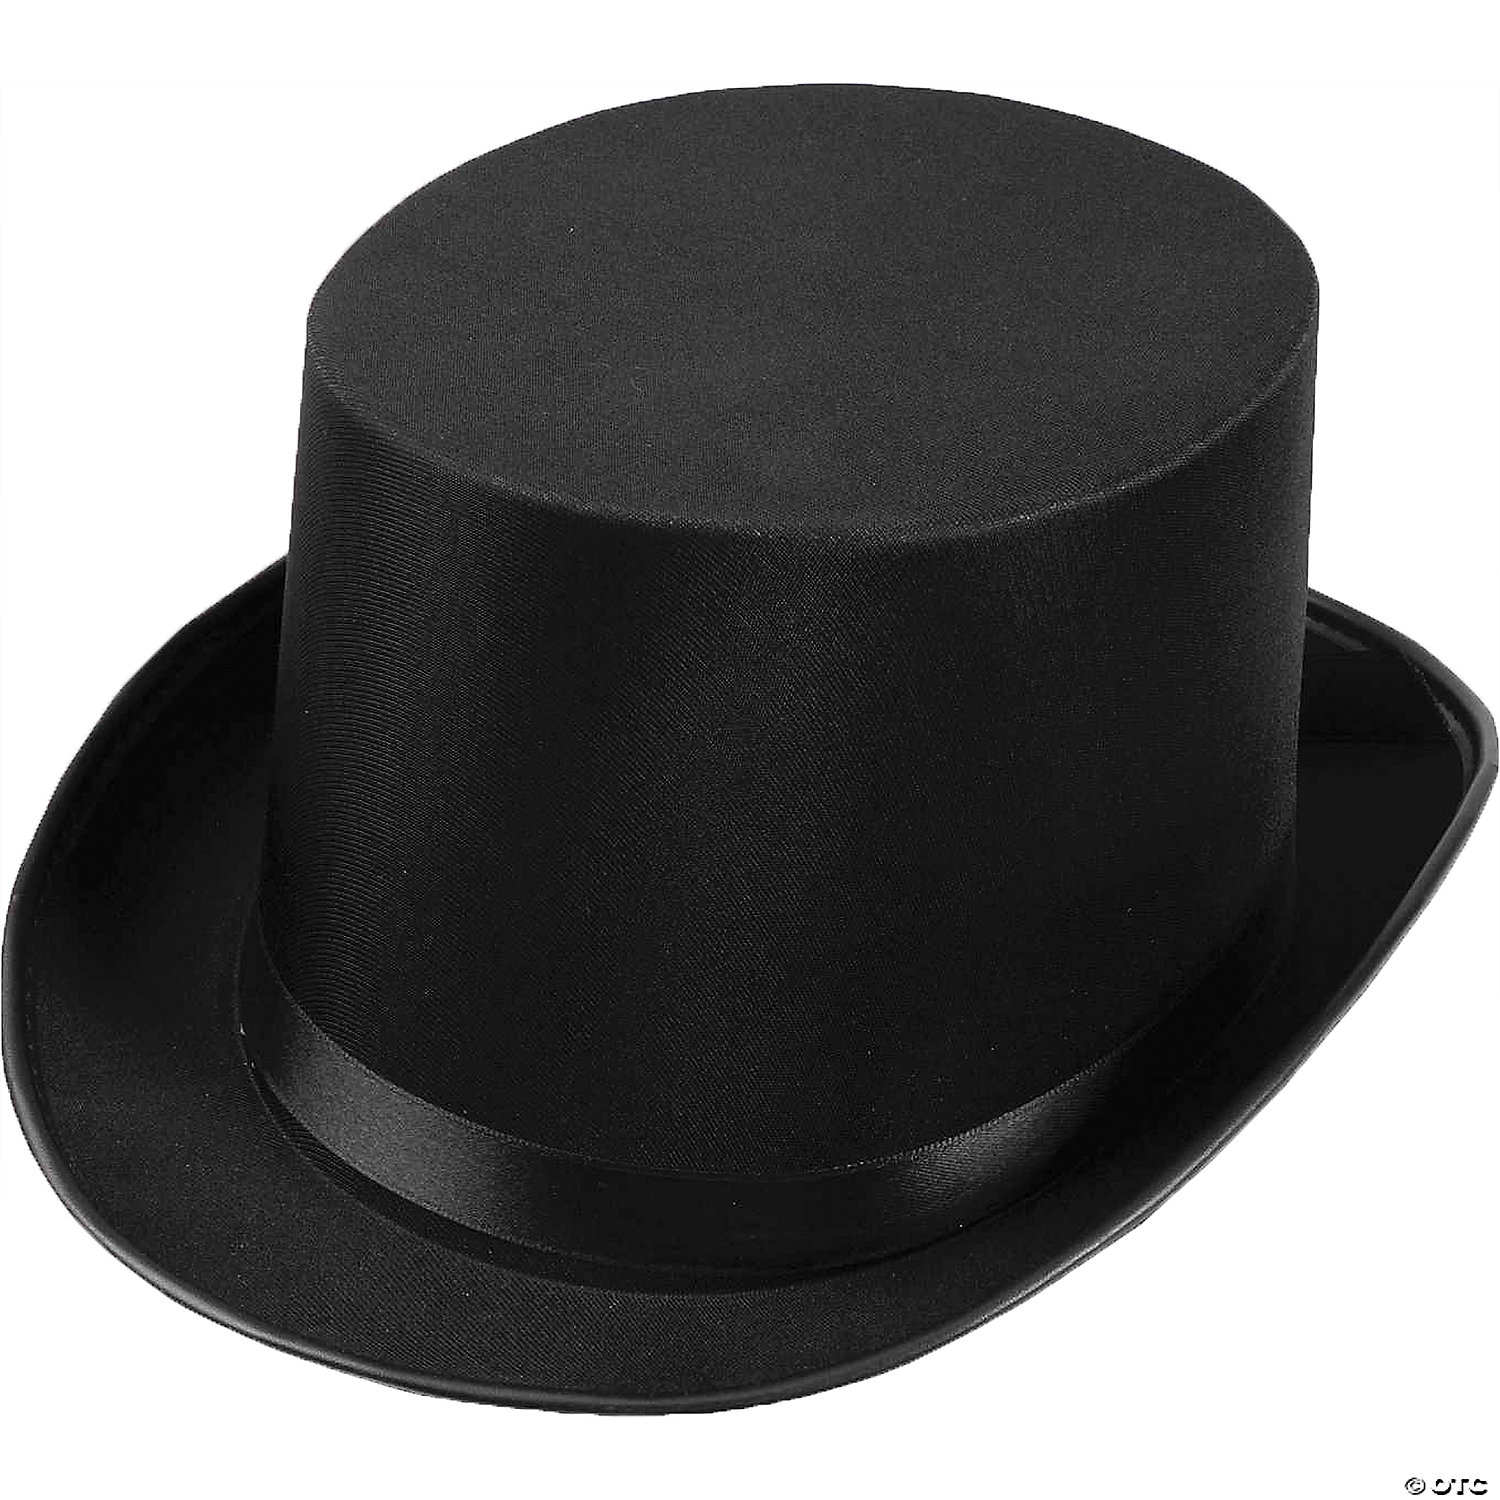 ADULT SATIN TOP HAT - NEW YEAR'S